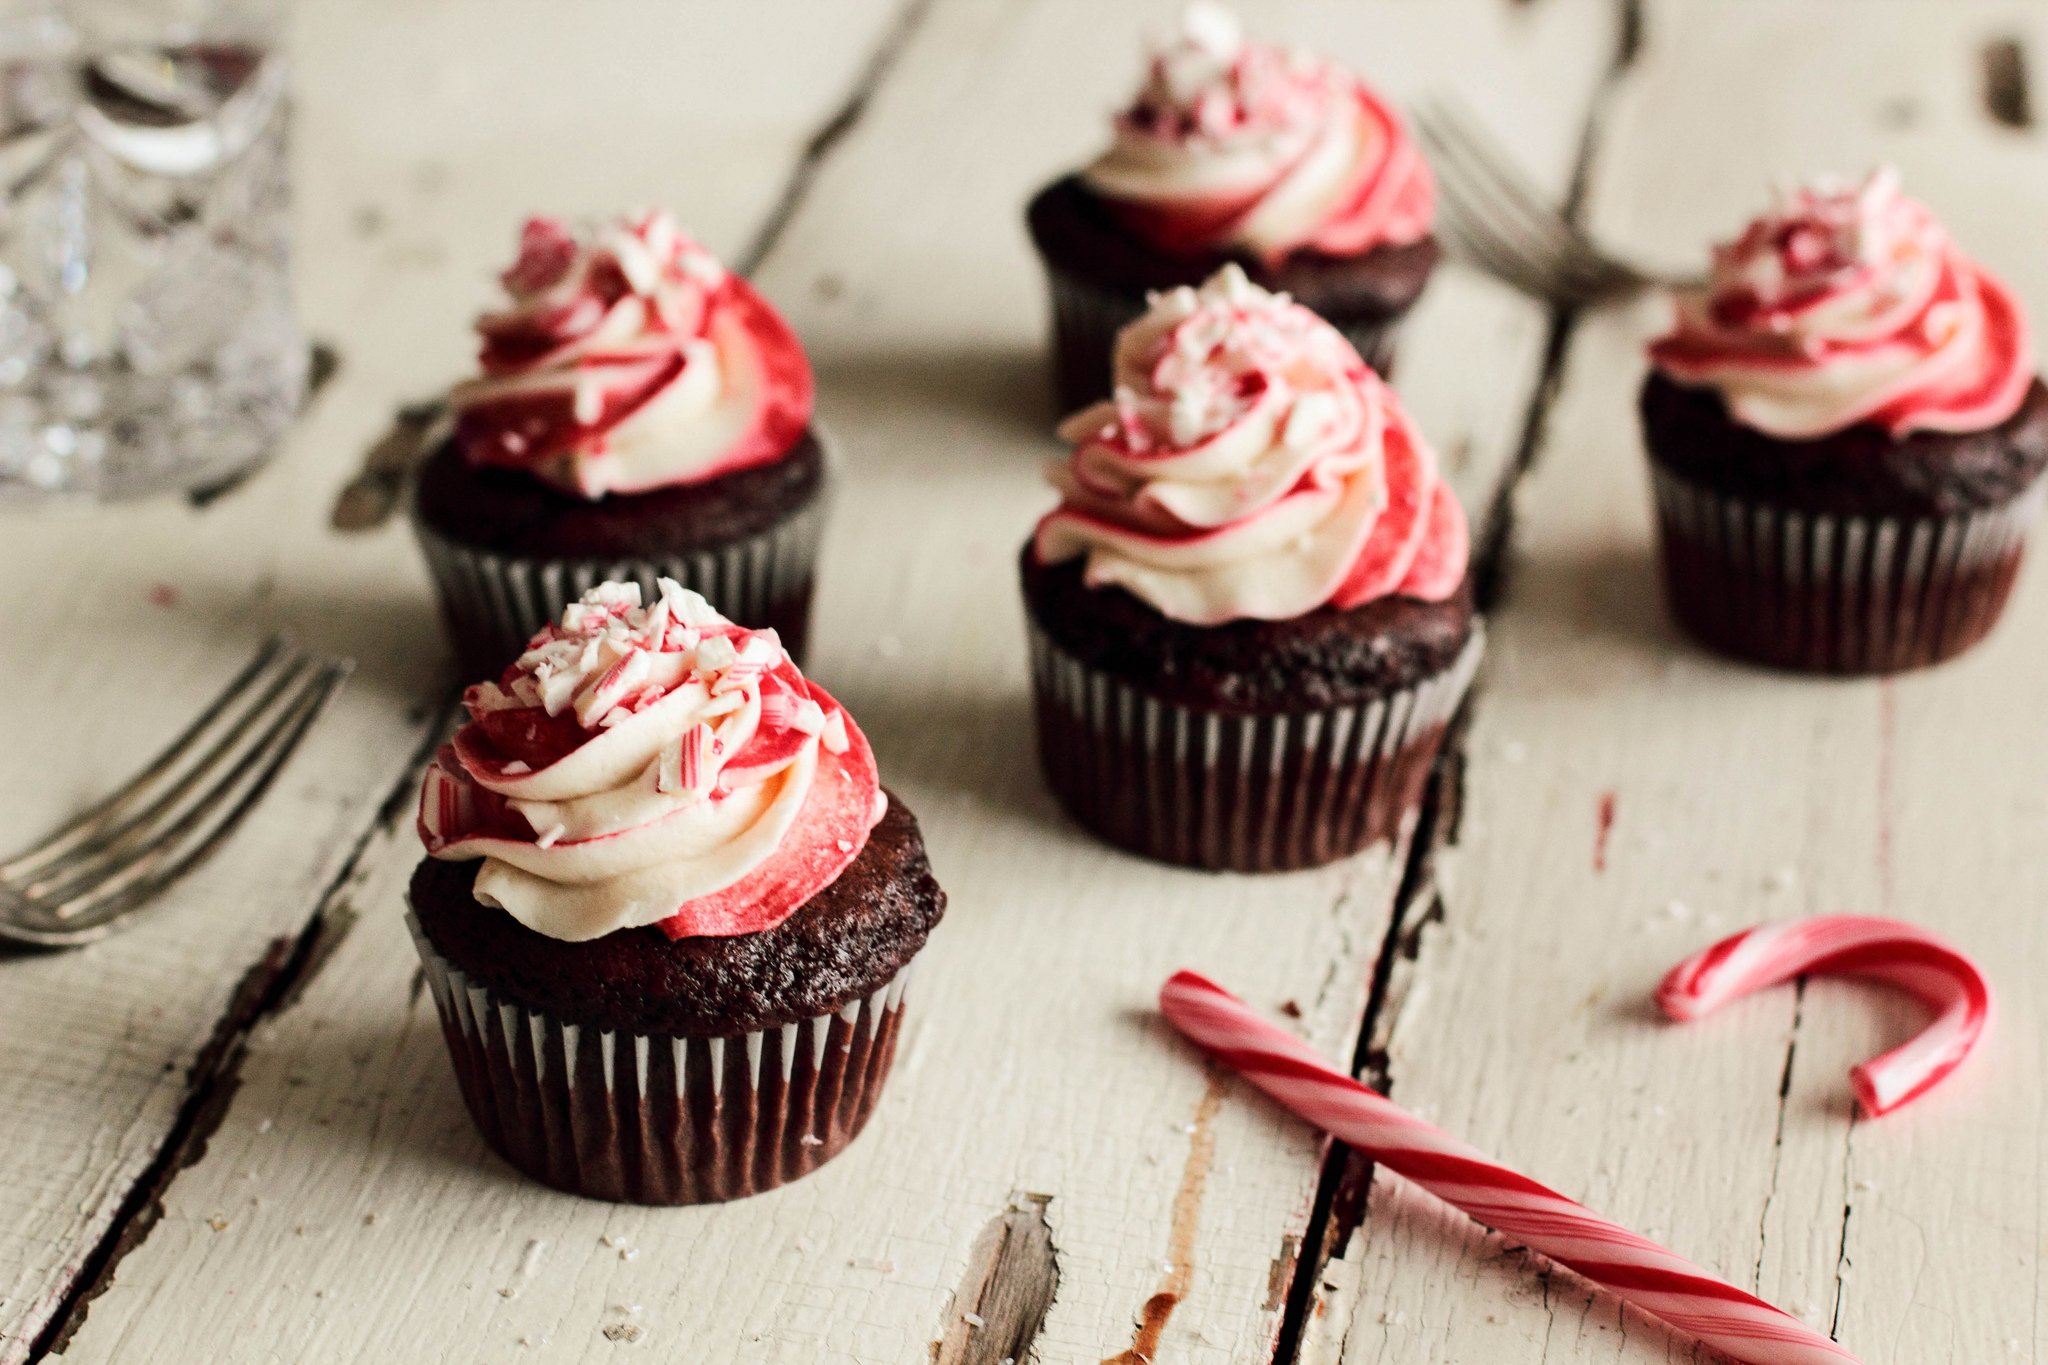 cupcakes, Fork, Dessert, Chocolate, Candy Cane Wallpaper